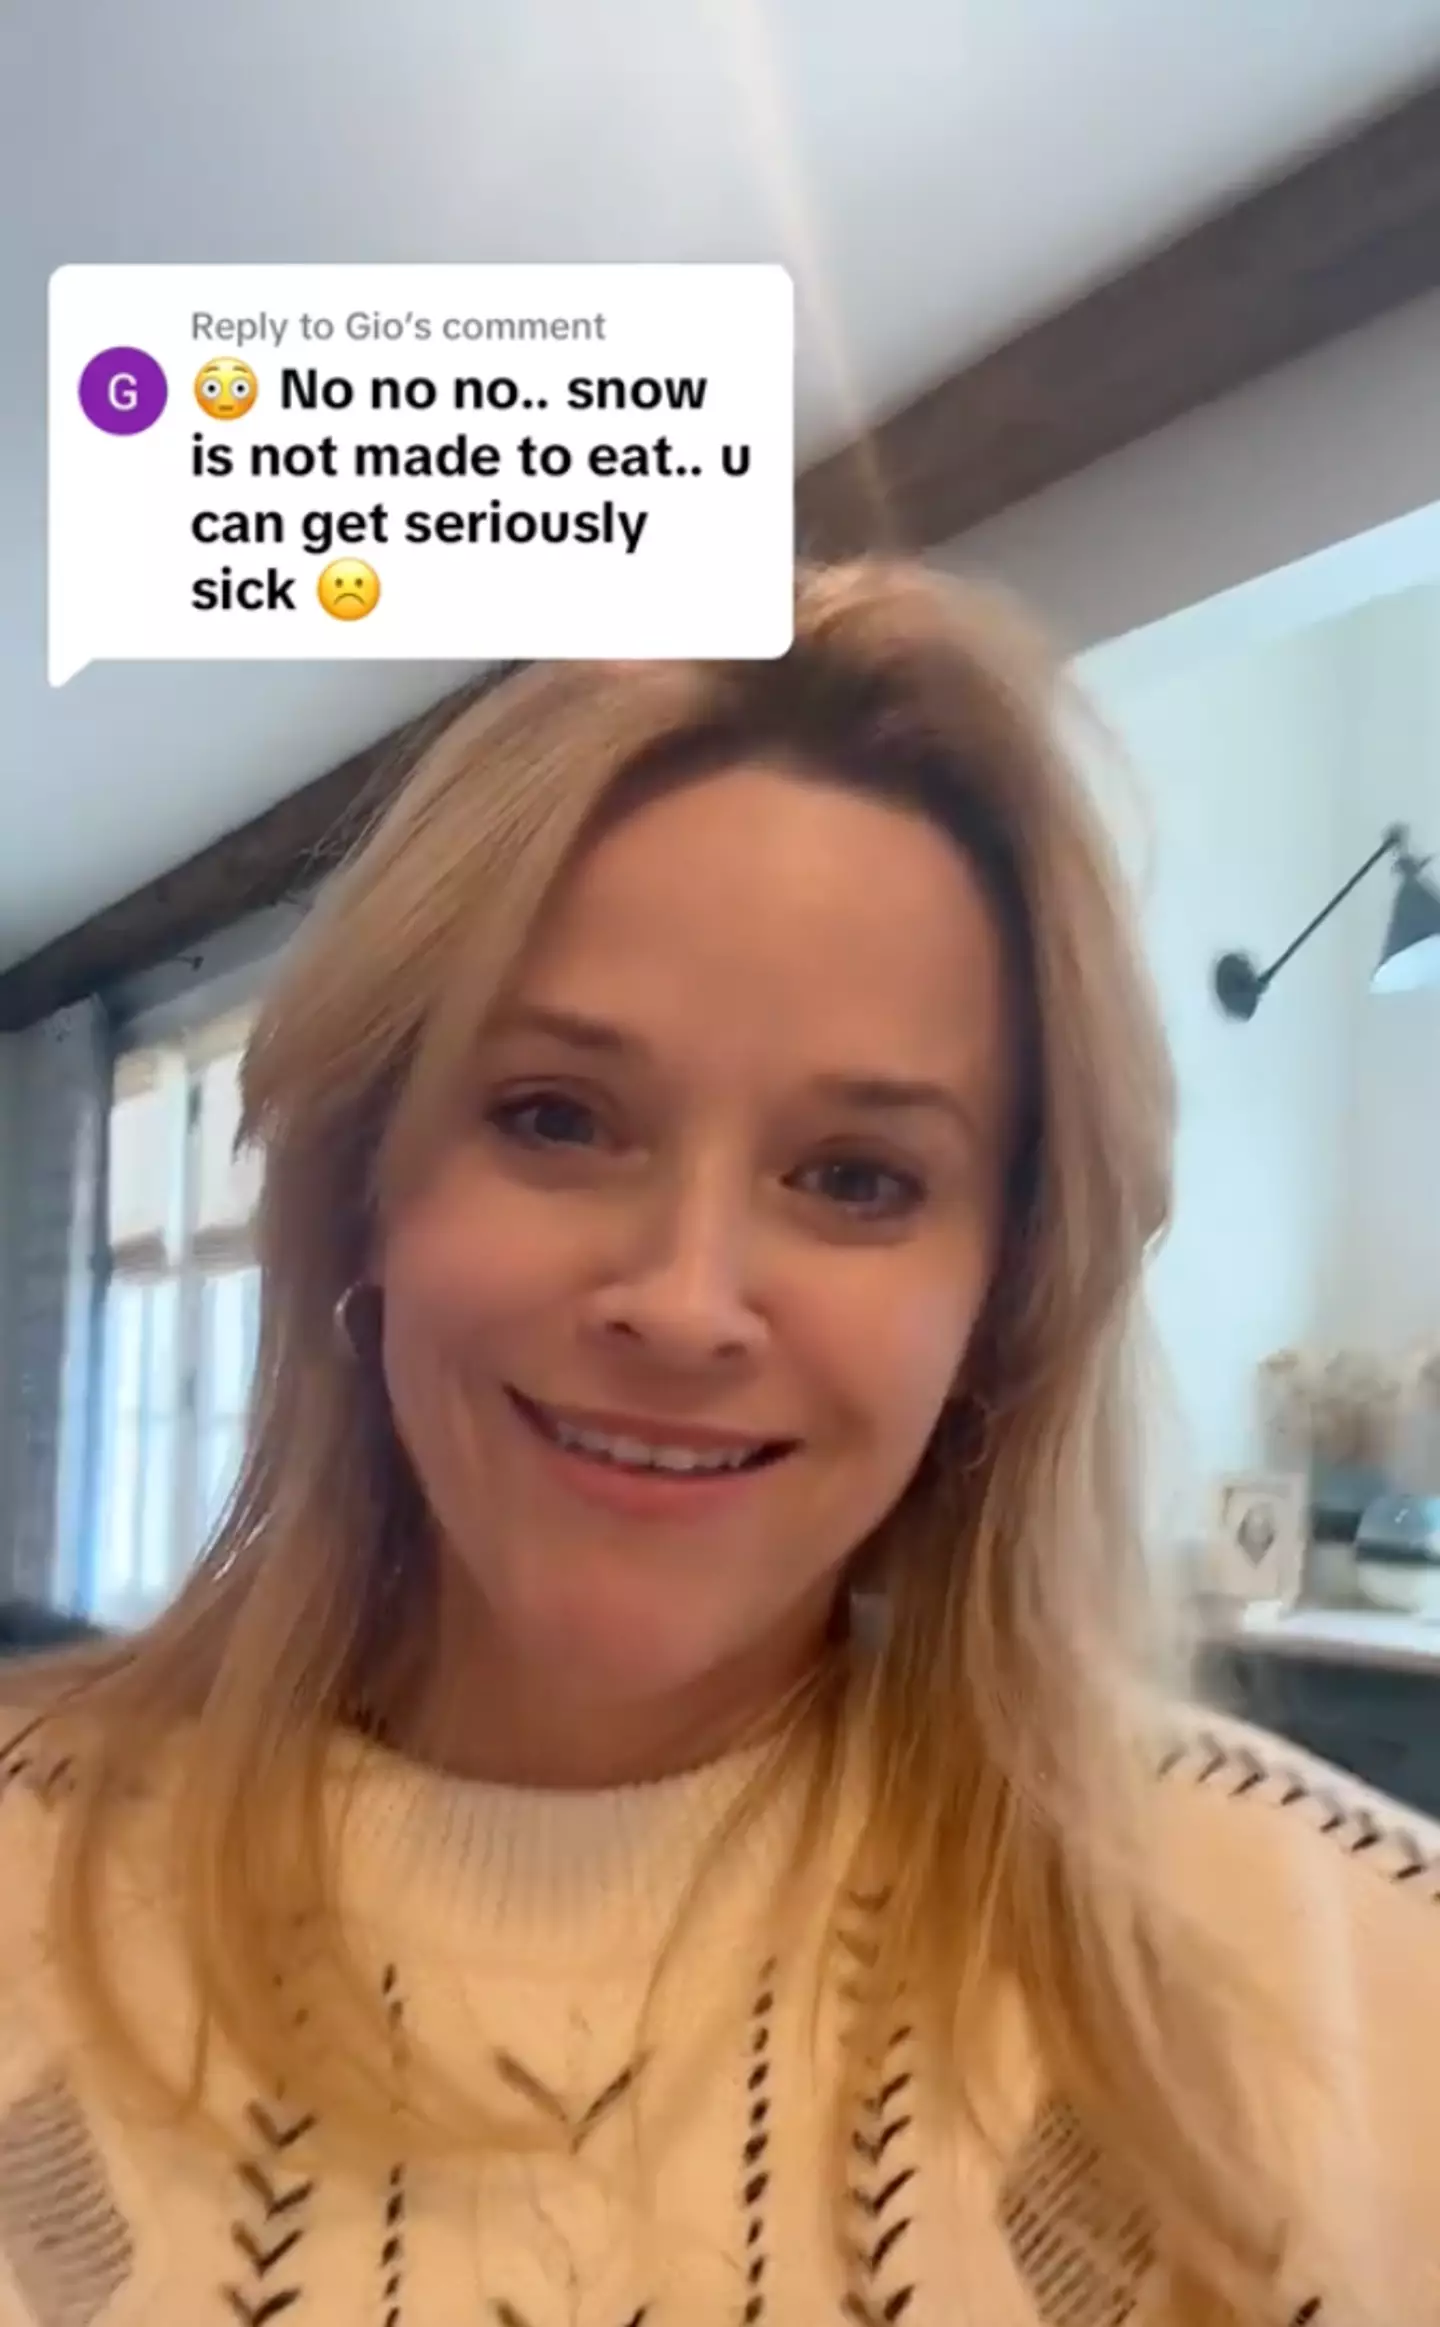 Reese addressed the comments online.